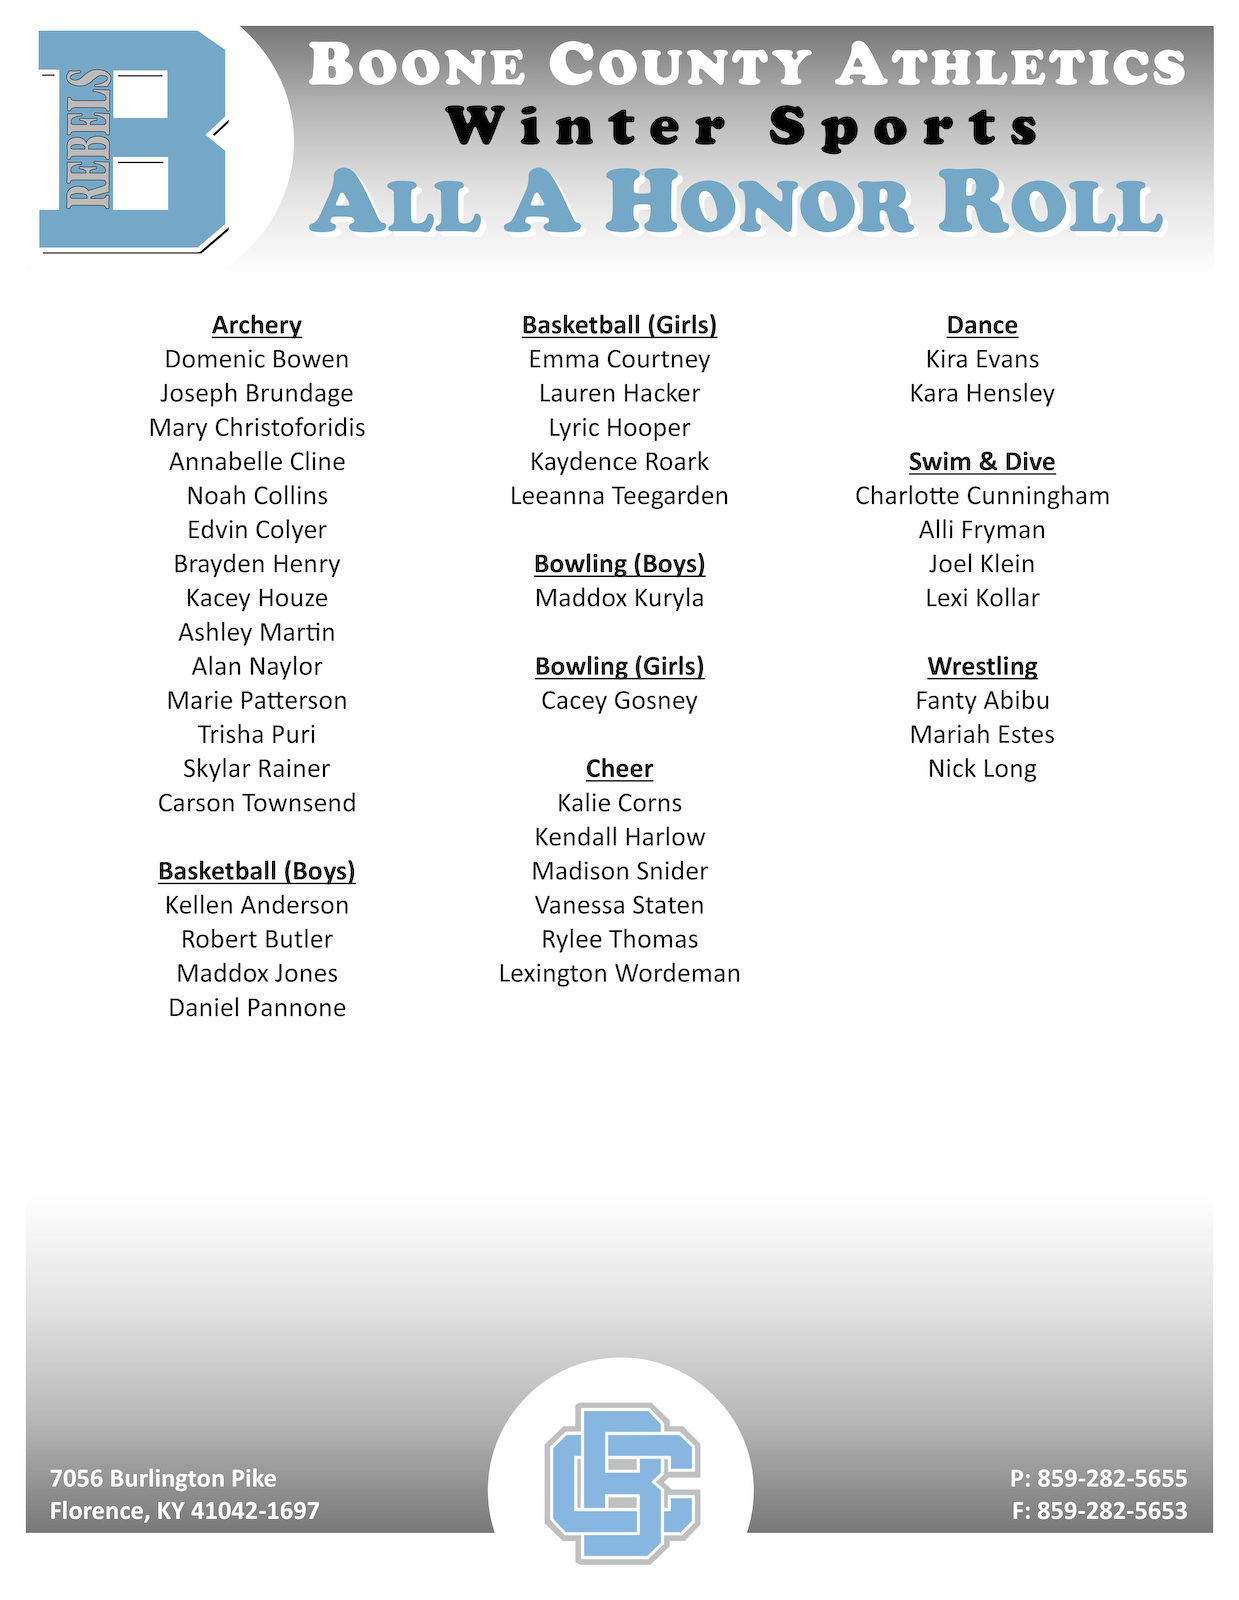 74 winter student athletes named to athletic honor roll cover photo